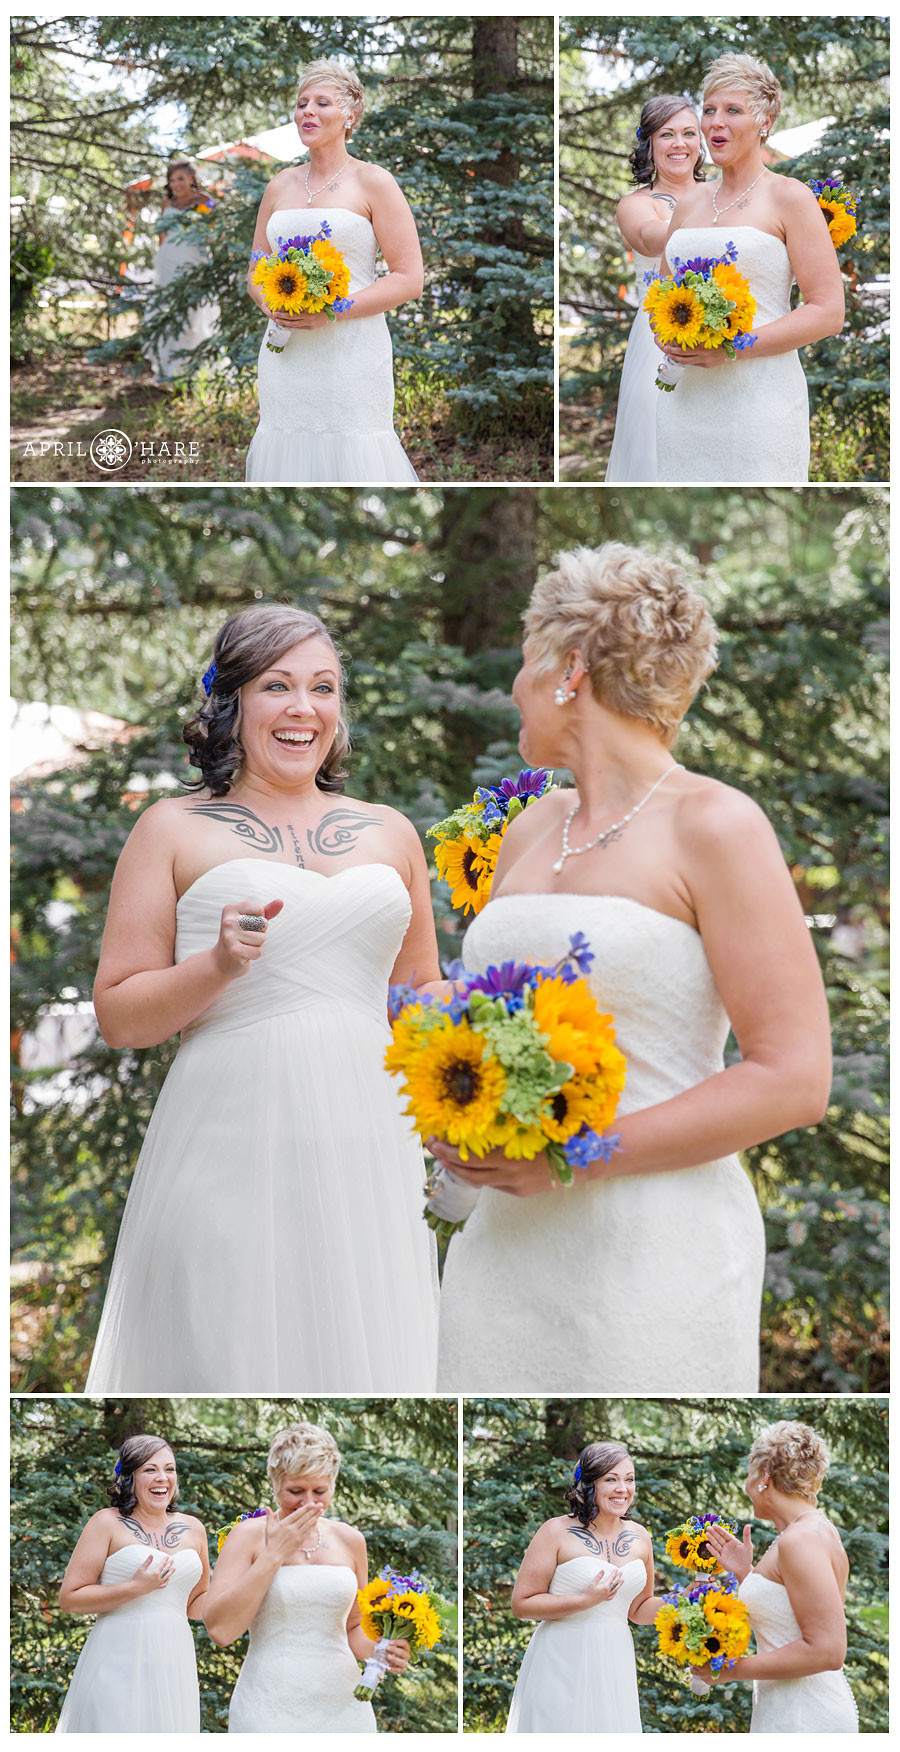 Super cute first look for two brides at their Backyard Lesbian Wedding in Colorado